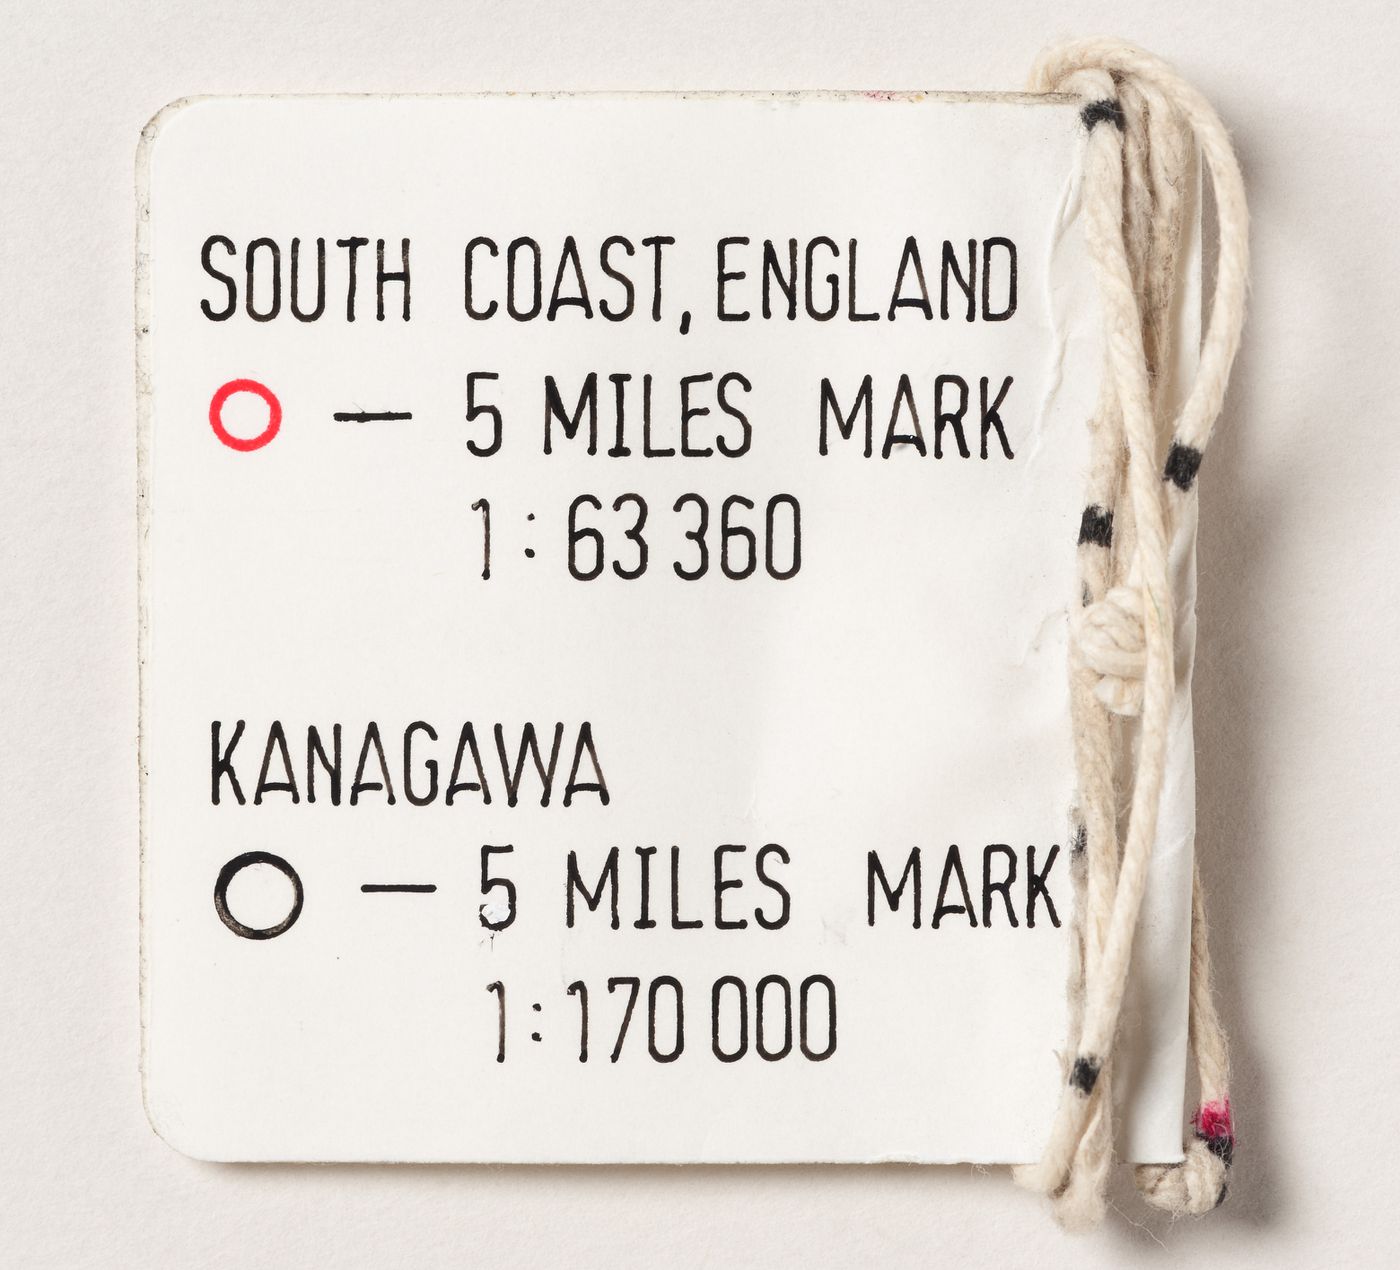 SURF 90: length of string with label for "5 miles mark" for the South Coast of England and for Kanagawa, Japan